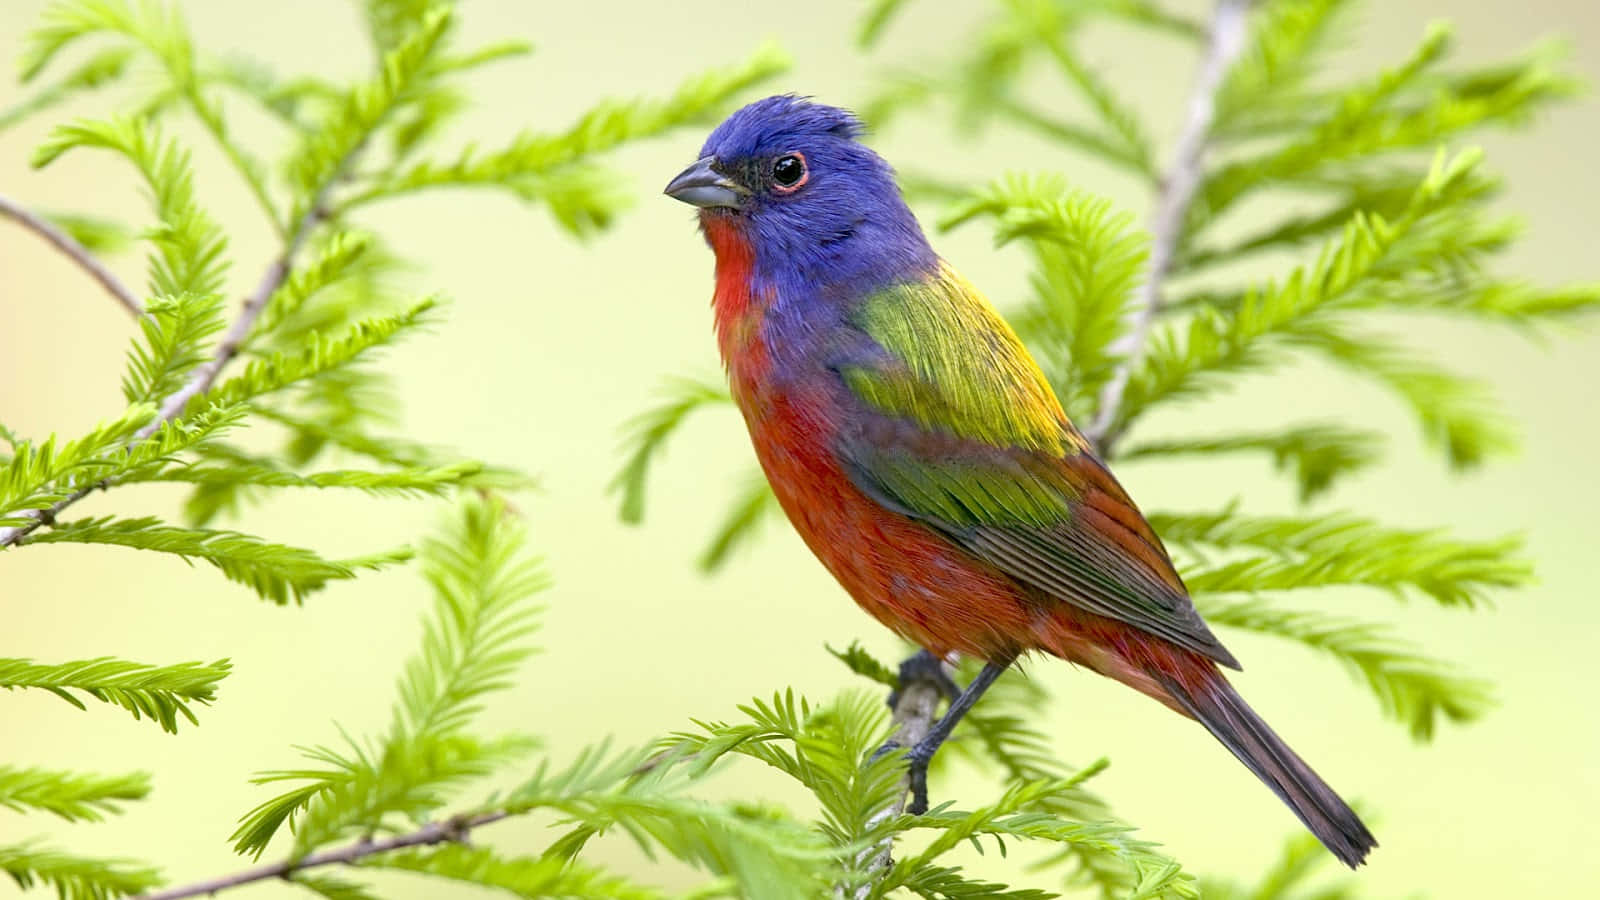 A Colorful Bird Is Sitting On A Branch